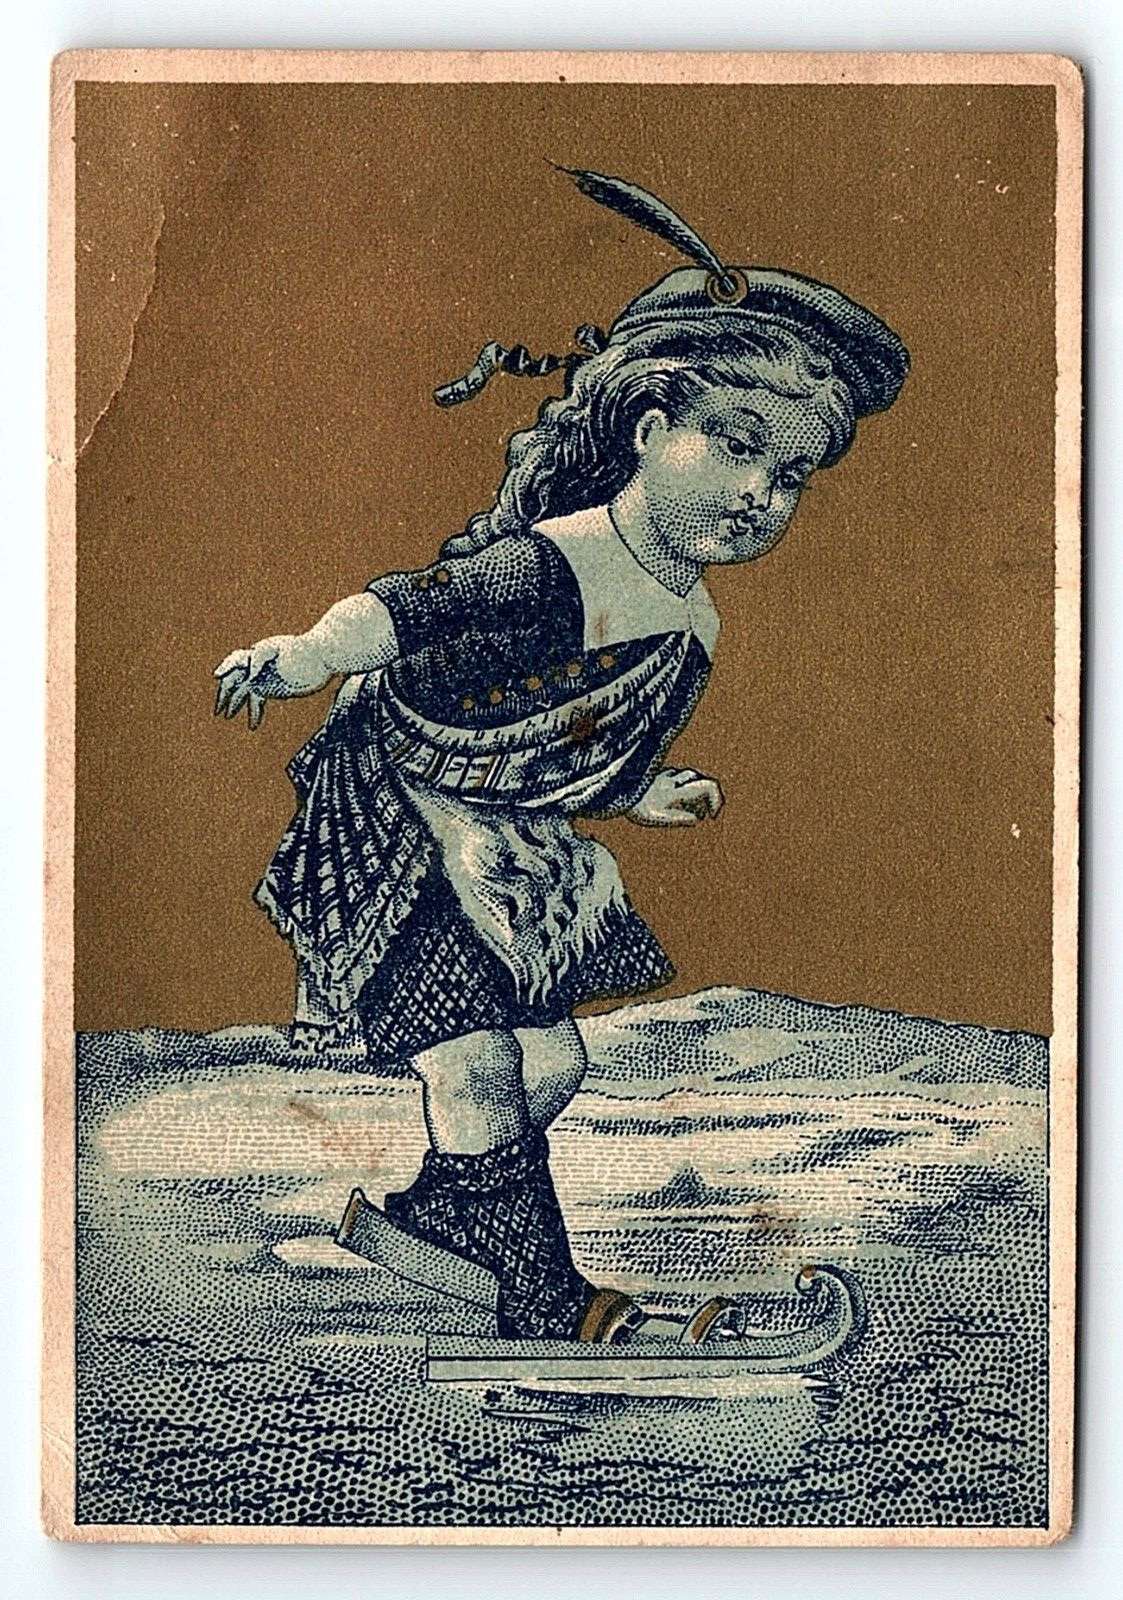 c1880 FRENCHTOWN N.J. G.W. BUNN CARRIAGES ICE SKATING VICTORIAN TRADE CARD P1893